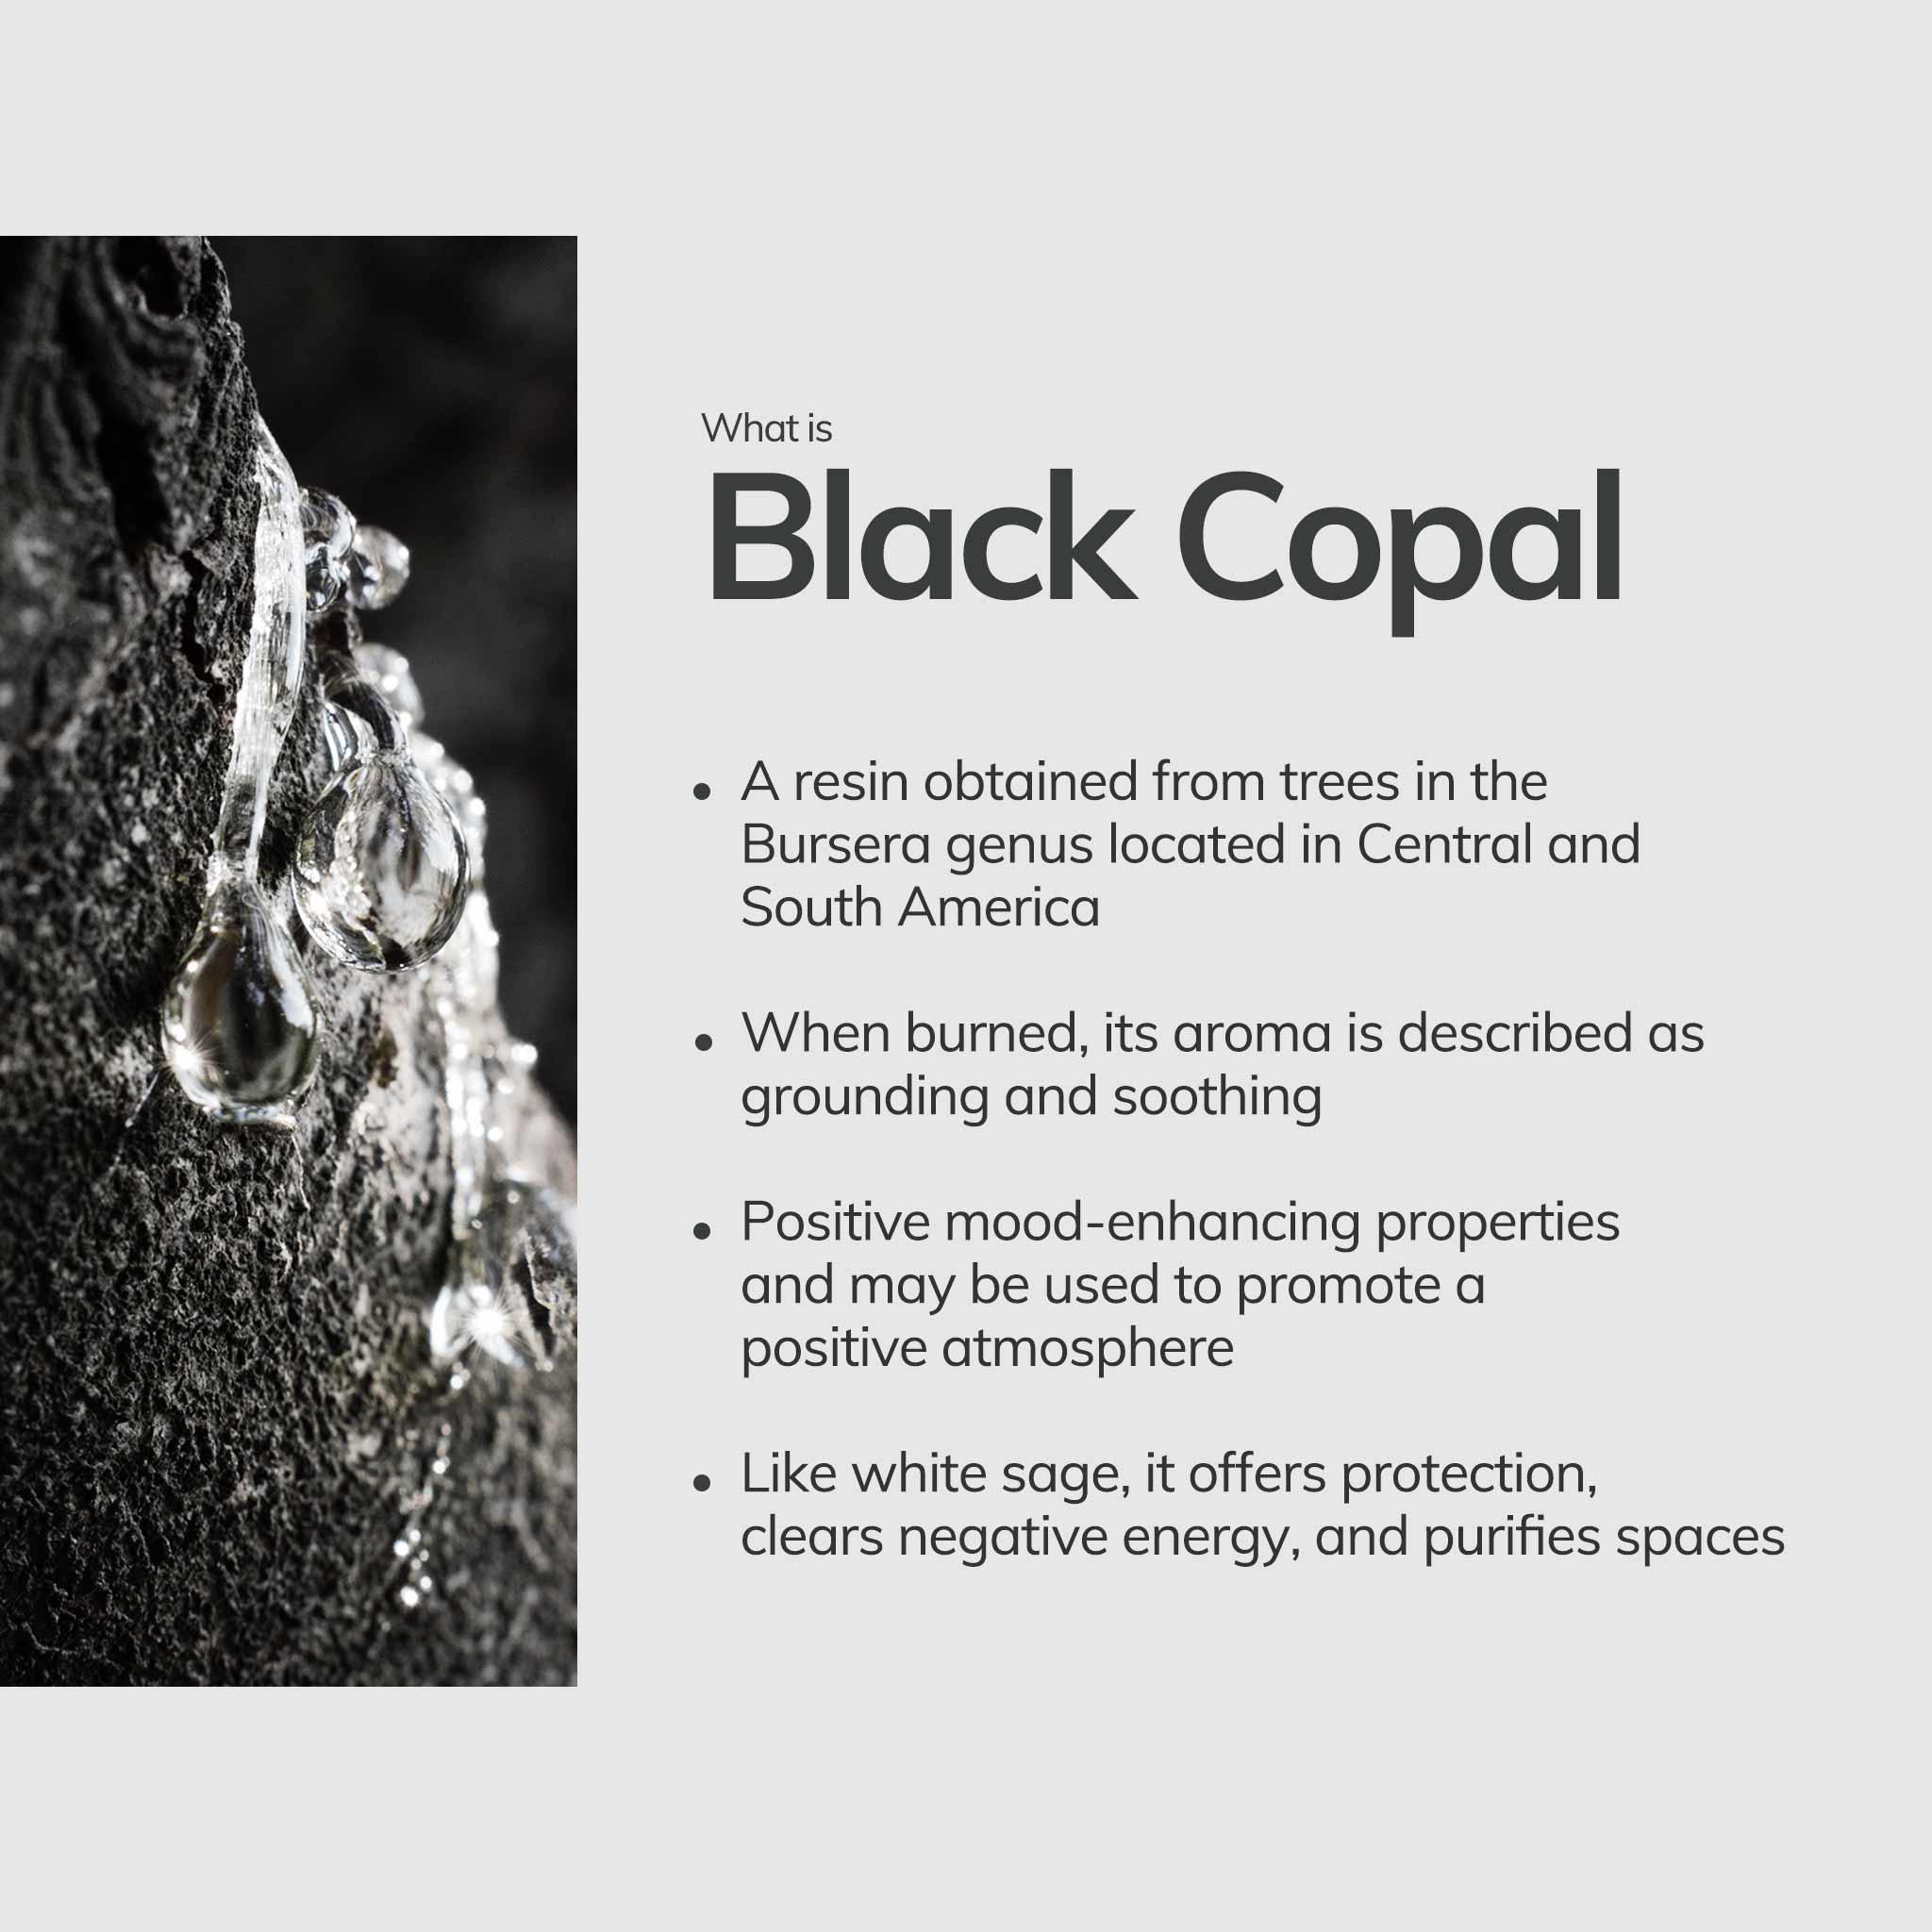 Left: Black copal resin on a tree; Right: Bullet list telling what is black copal is used for.